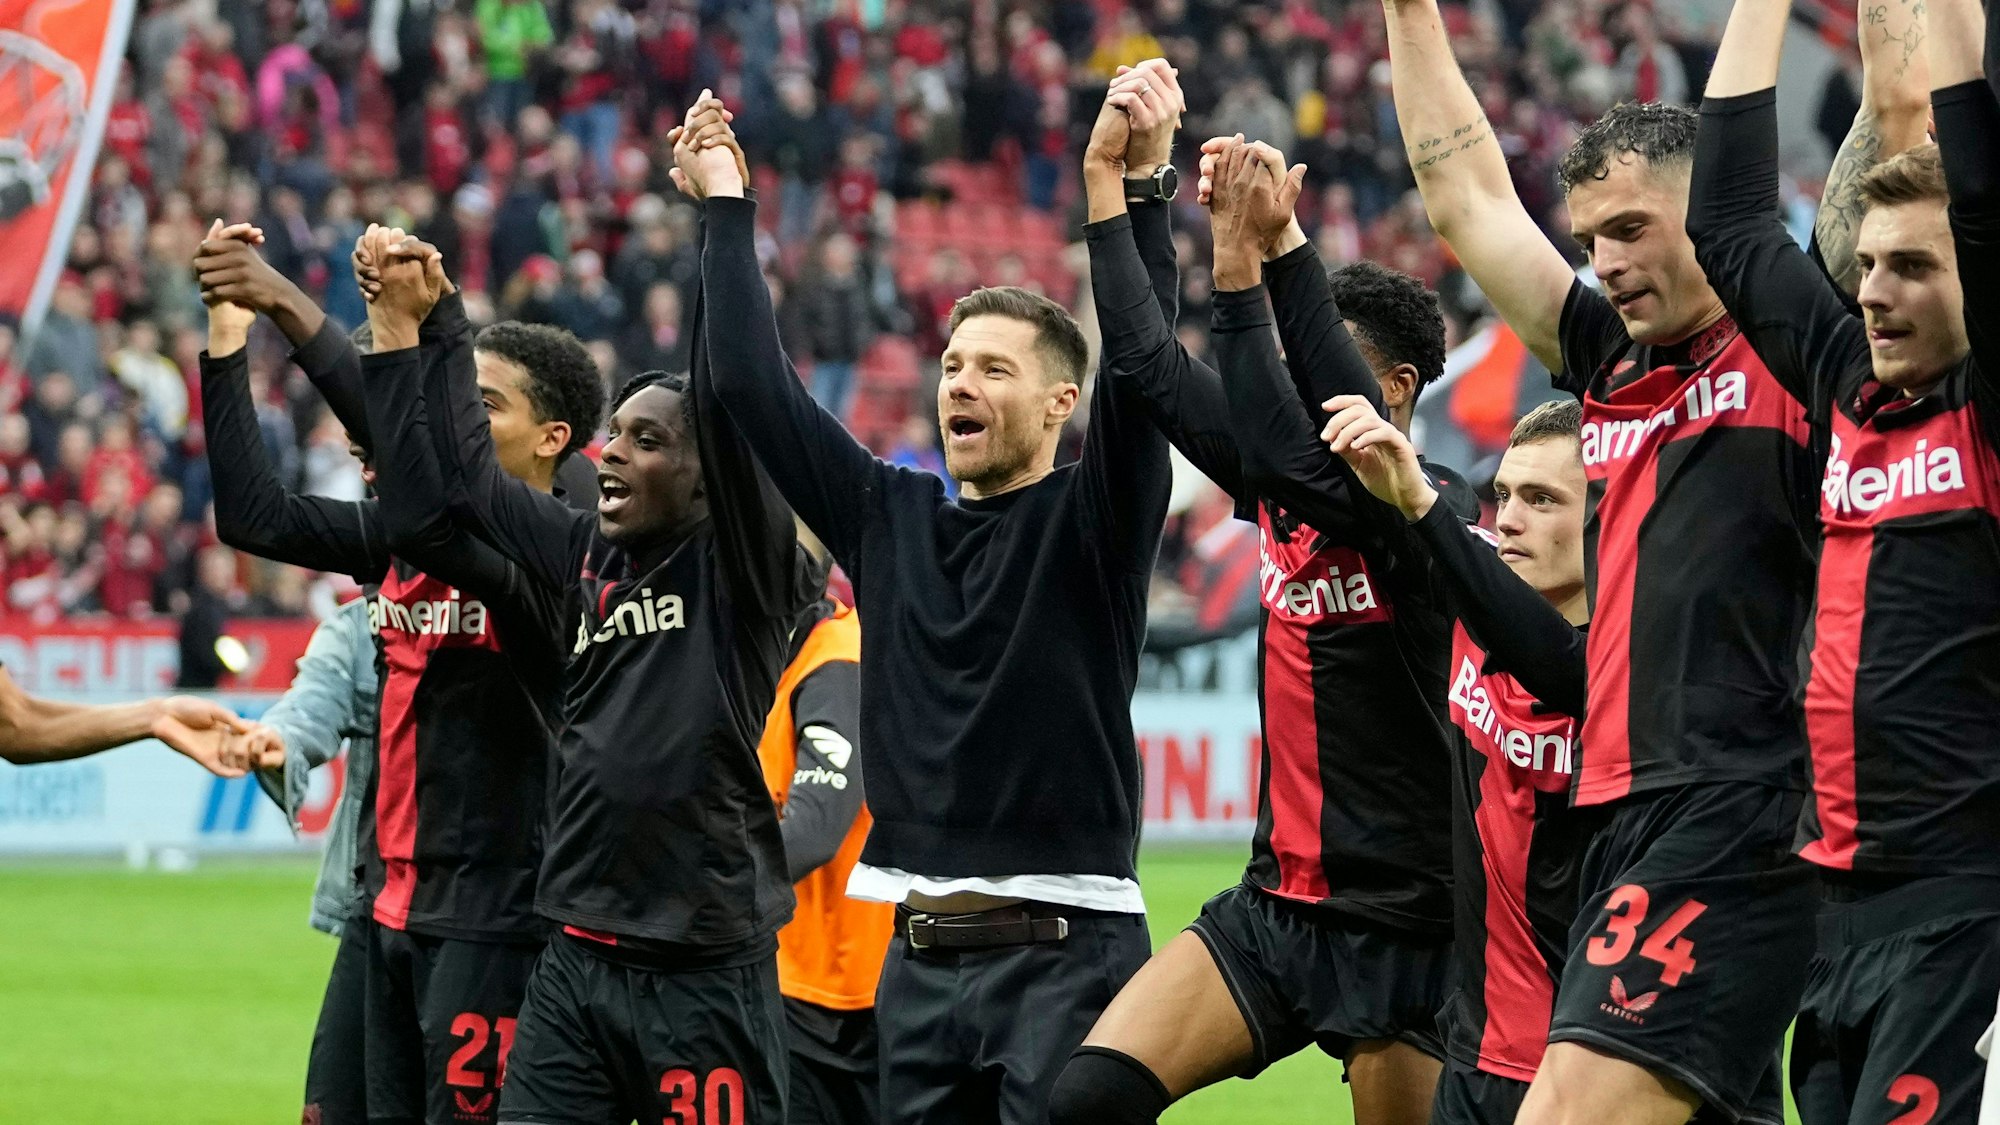 Leverkusen's head coach Xabi Alonso, center, celebrates with his team in front of supporters after winning the German Bundesliga soccer match between Bayer Leverkusen and TSG Hoffenheim at the BayArena in Leverkusen, Germany, Saturday, March 30, 2024. (AP Photo/Martin Meissner)